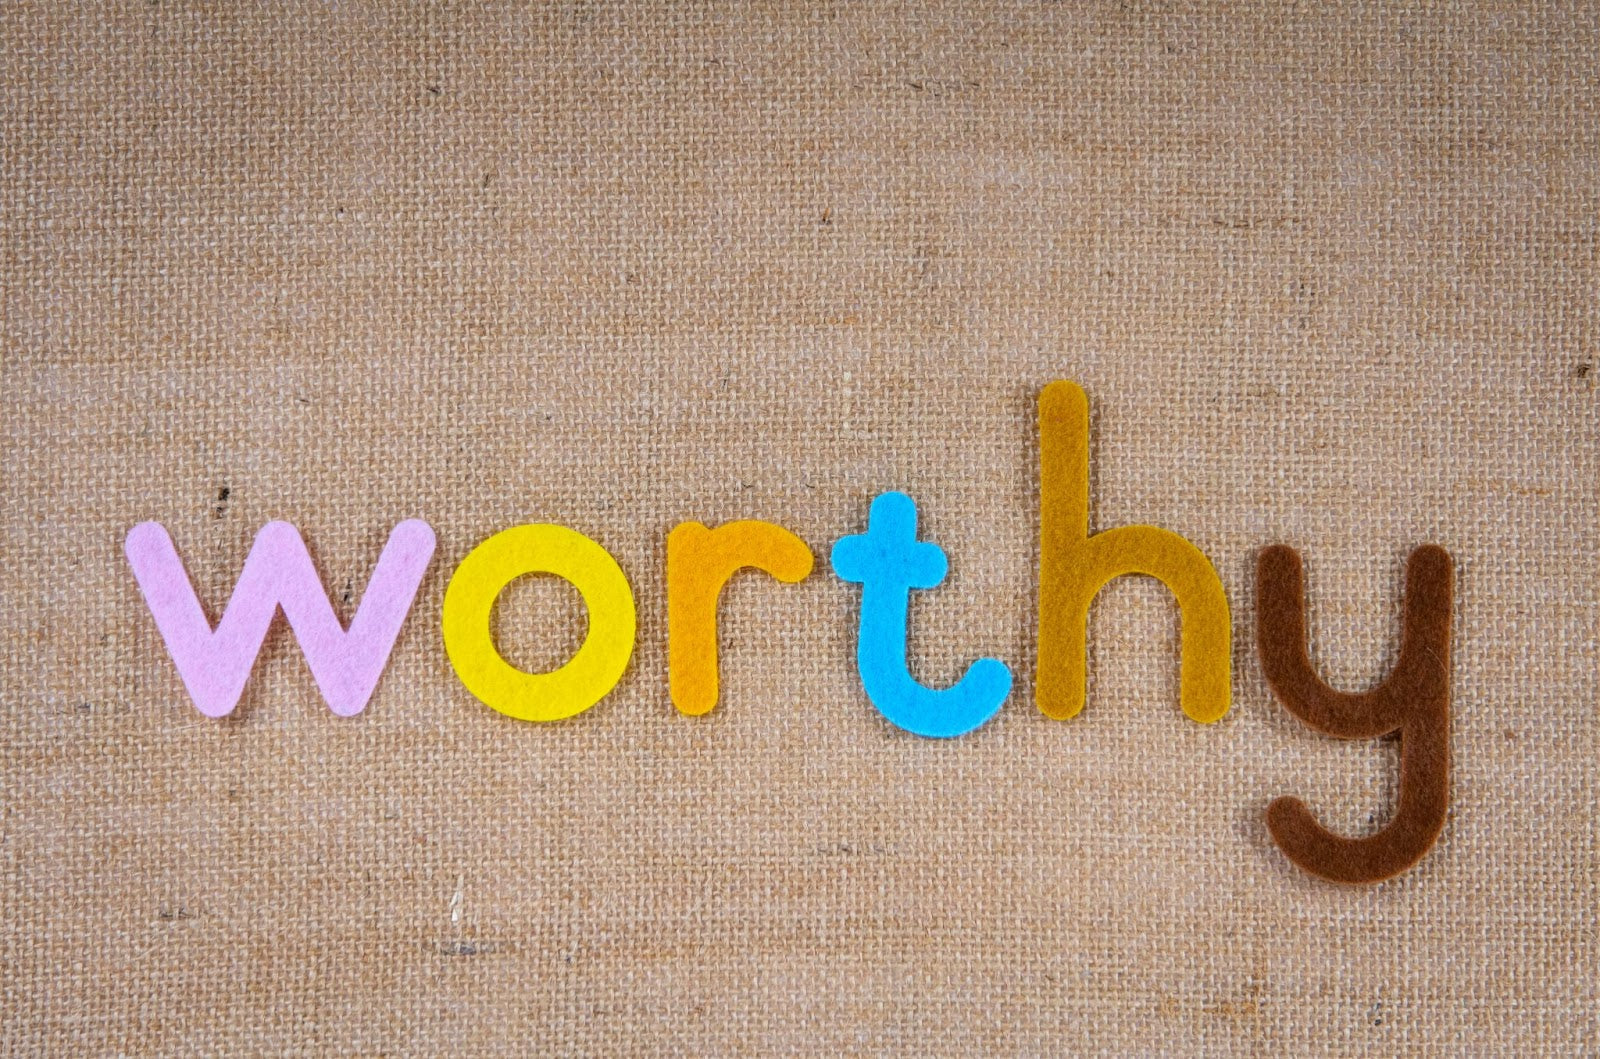 4 Things to Know About Worthiness